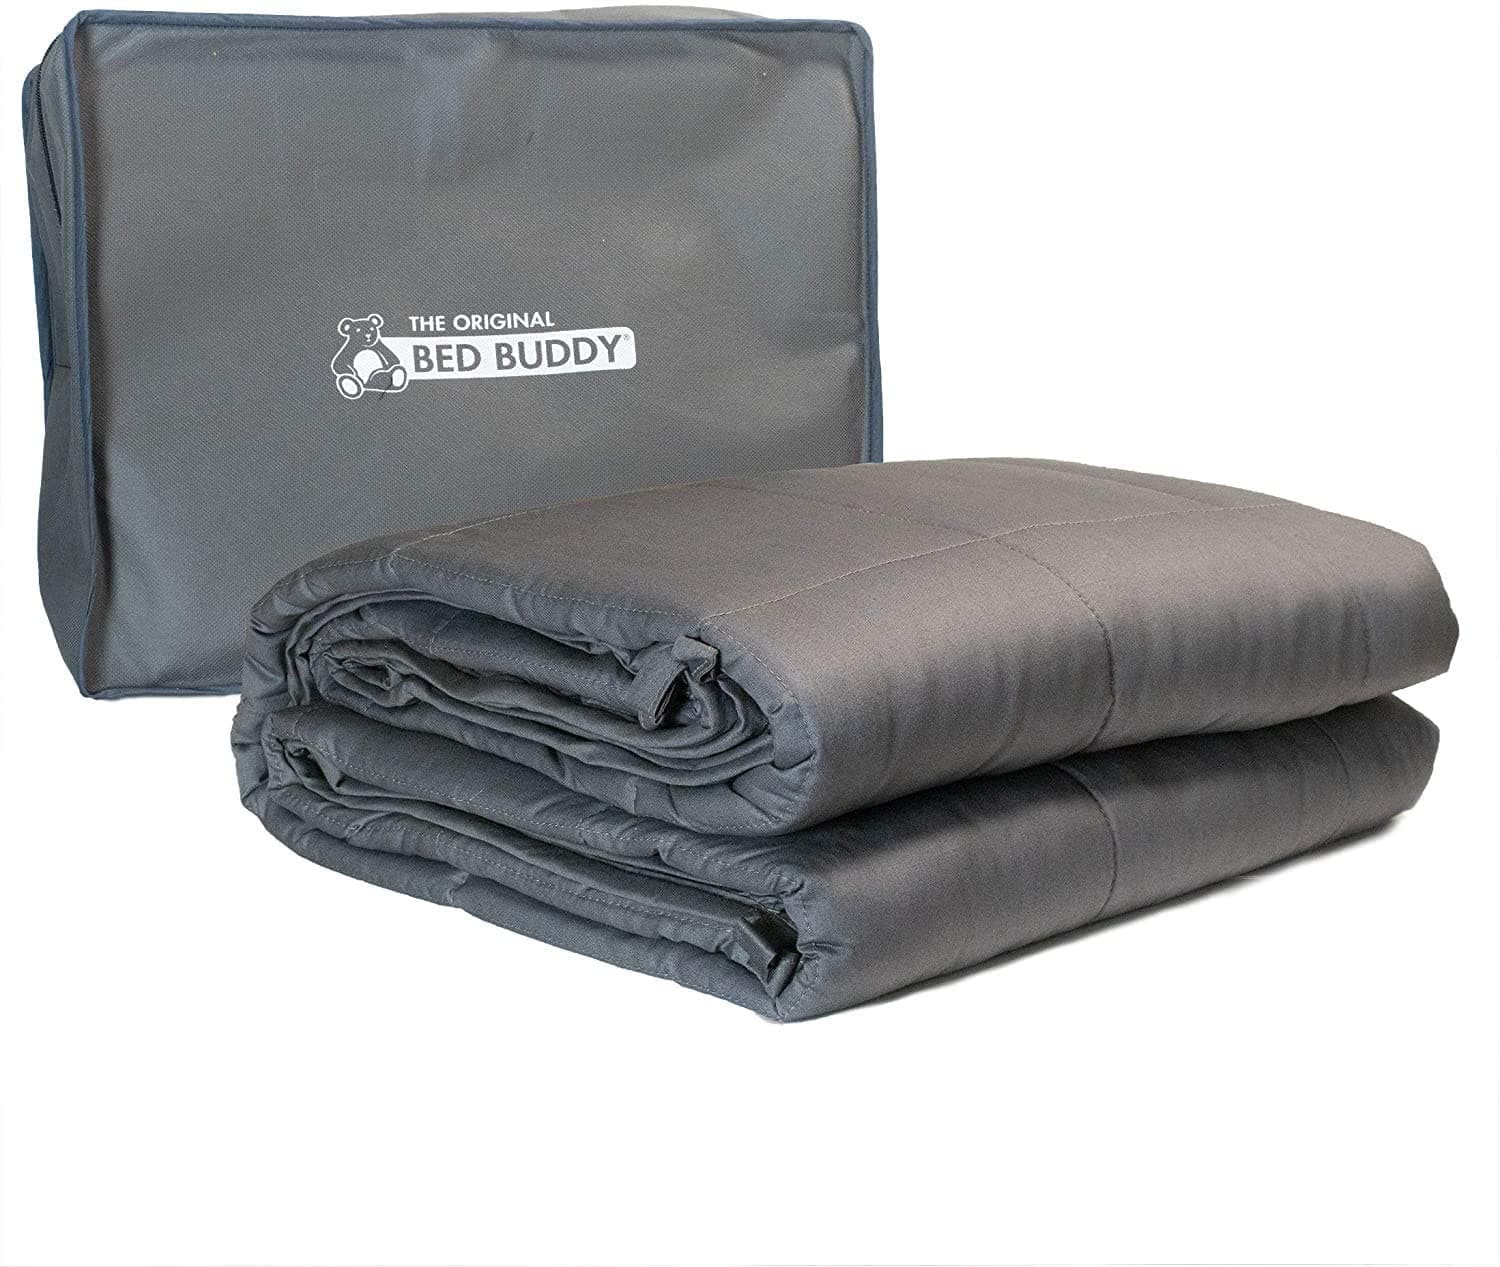 Compass Health Compass Health Bed Buddy Weighted Blanket, Adult Size BBF1017-01